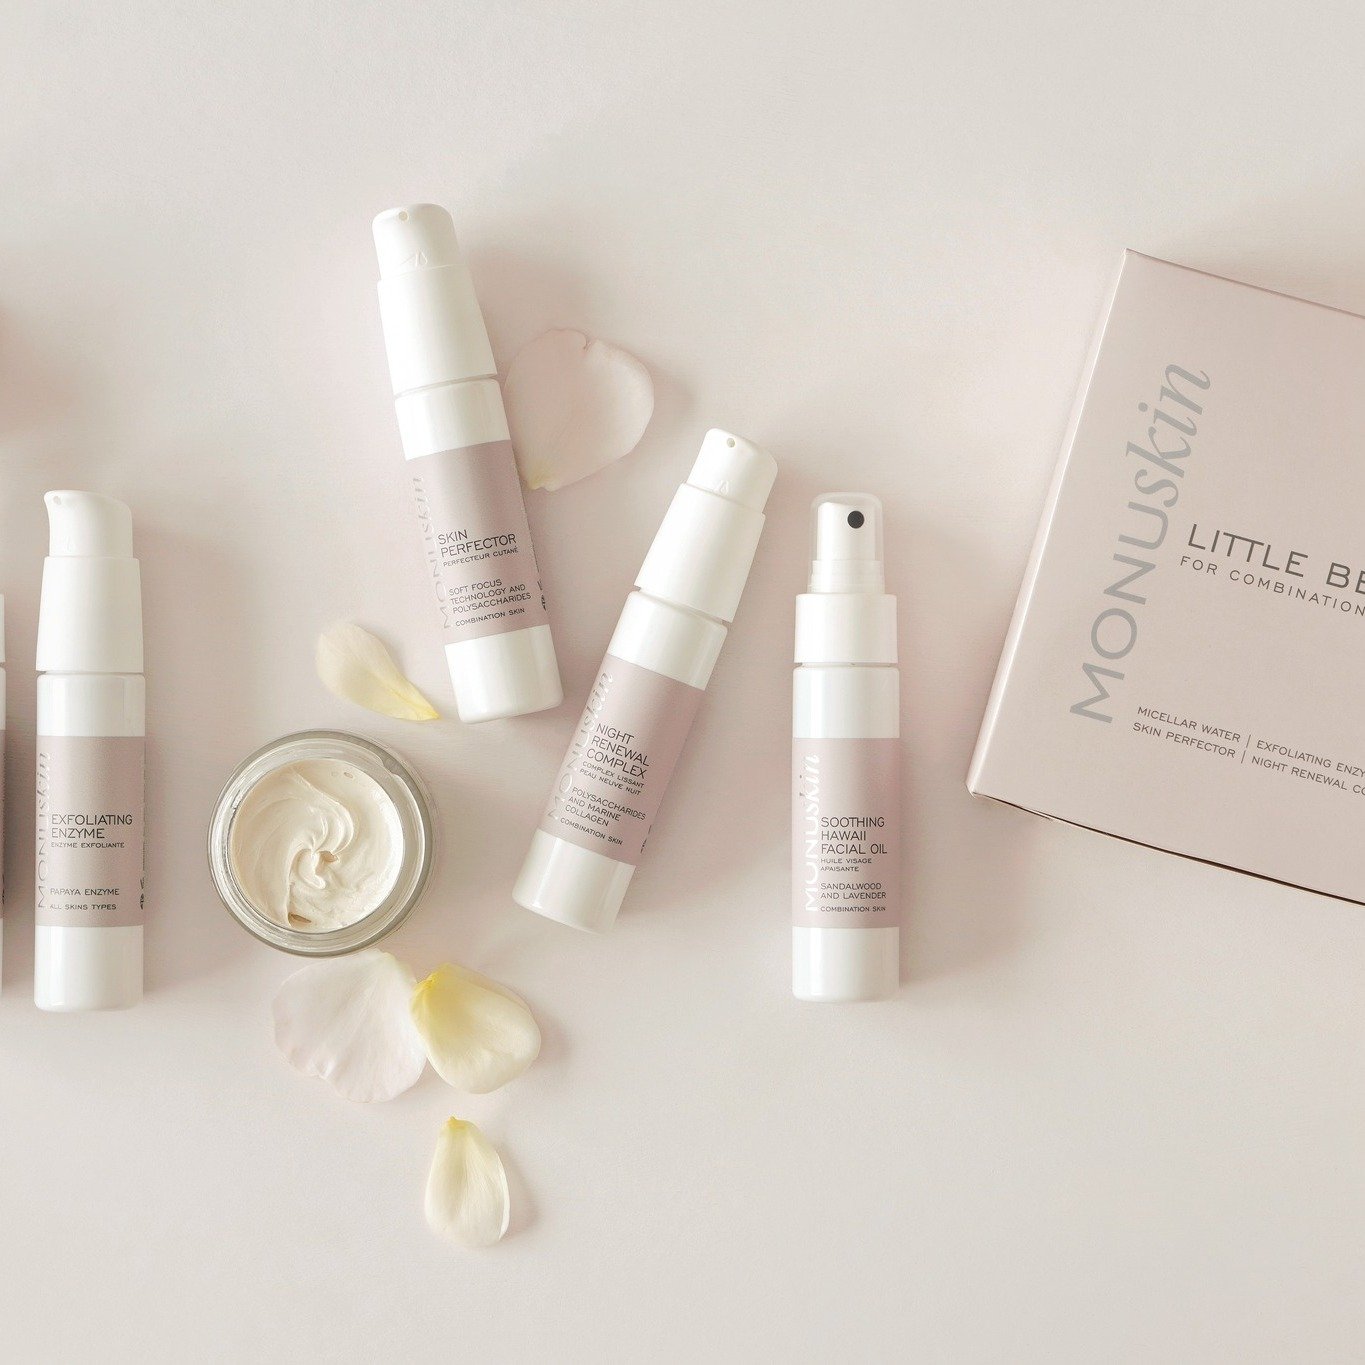 our Little Beauty Box for Combination Skin - the perfect introduction to MONU SKINCARE

 #combinationskincareroutine #combinationskin #combinationskincare #monuskin #monuskincare #smallbatchskincare #professionalskintherapist #beautytherapist